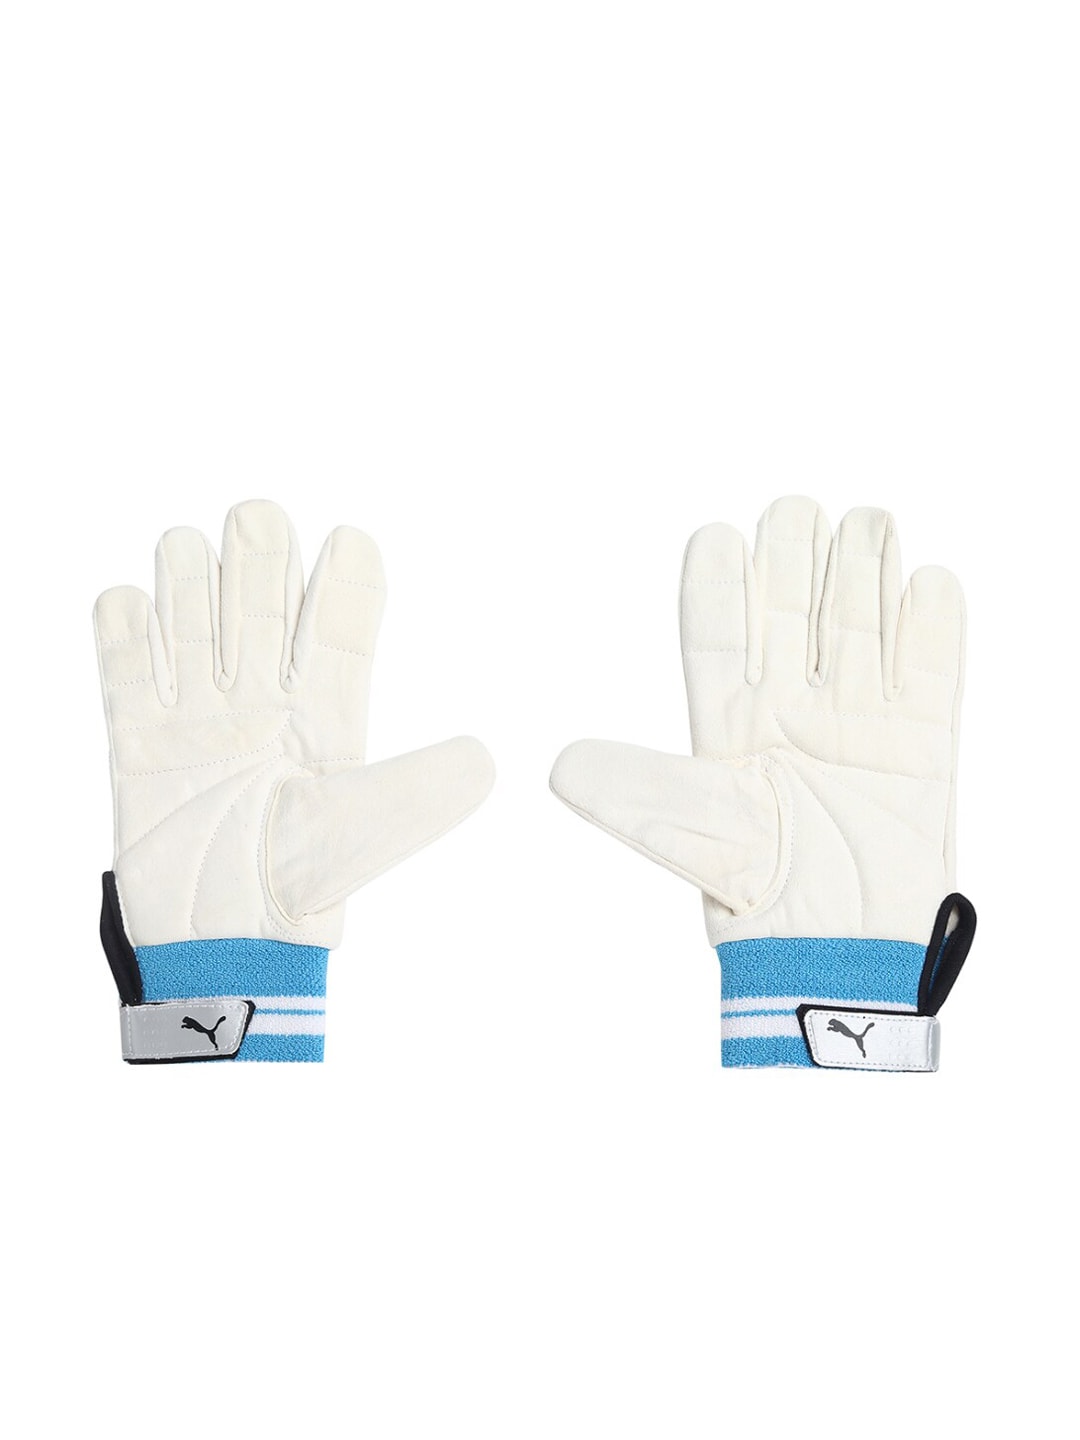 Puma White & Blue Future 20.1 Wicket Keeper Gloves Price in India